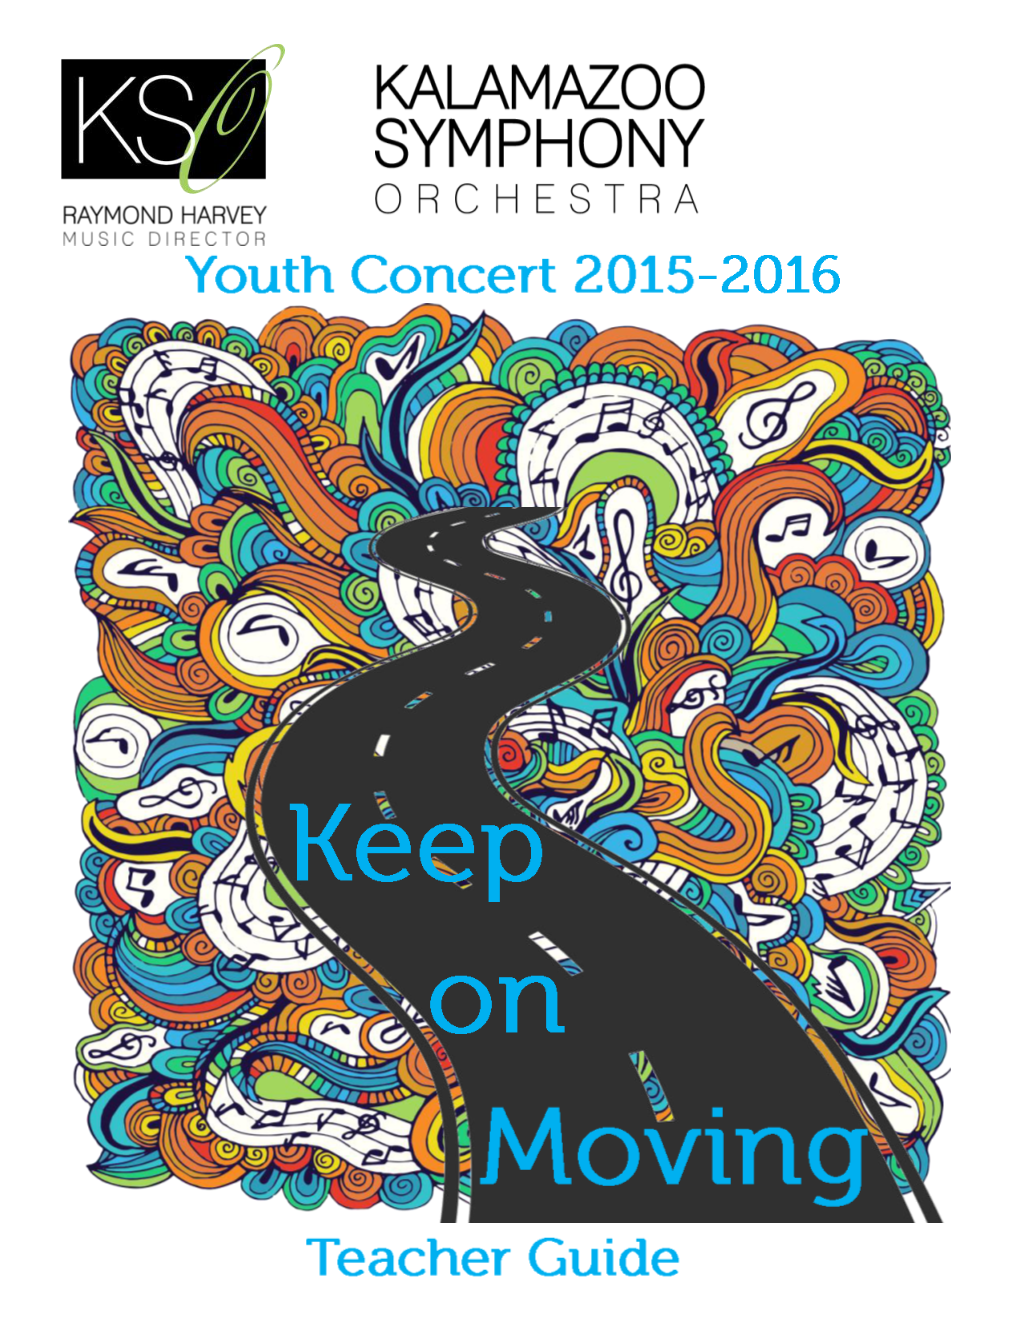 Keep on Moving Teacher Guide